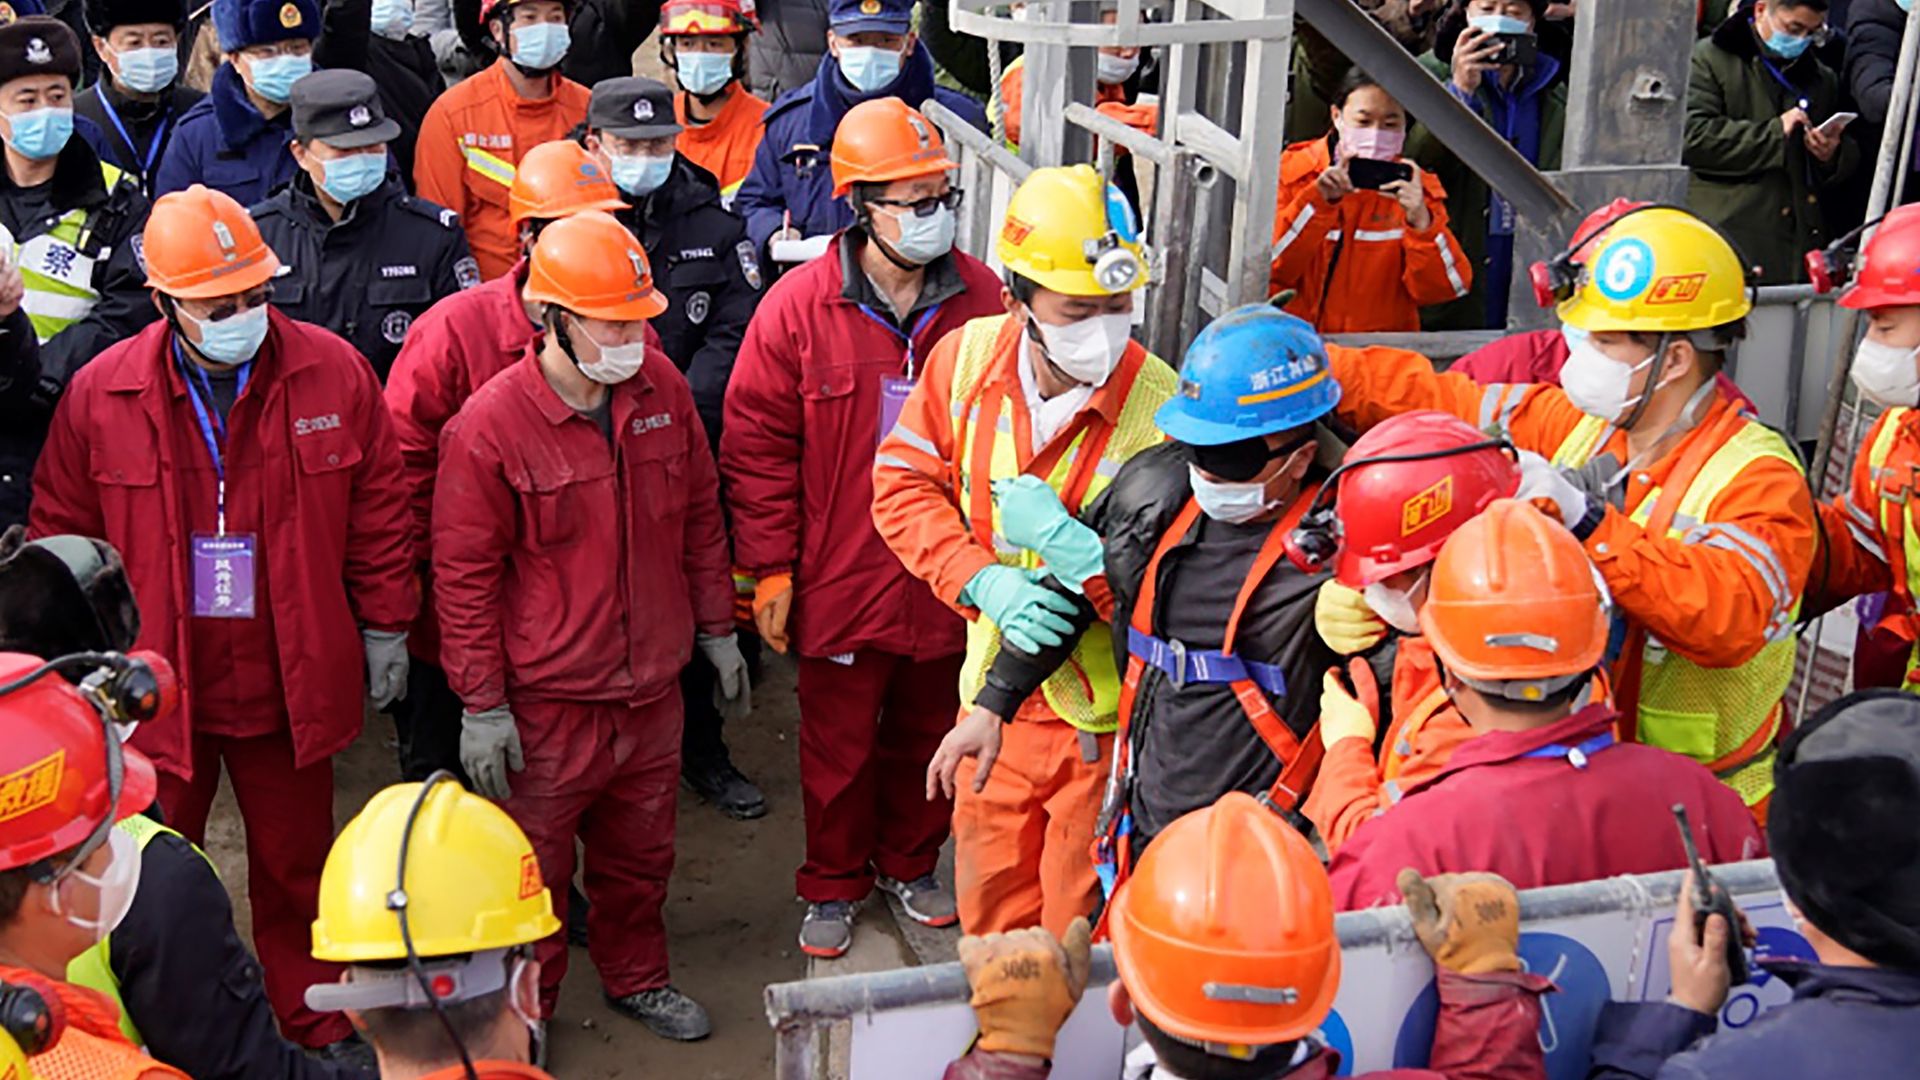 A Chinese miner is saved from hundreds of metres underground where he had been trapped for two weeks after a gold mine explosion in Qixia, in eastern China's Shandong province